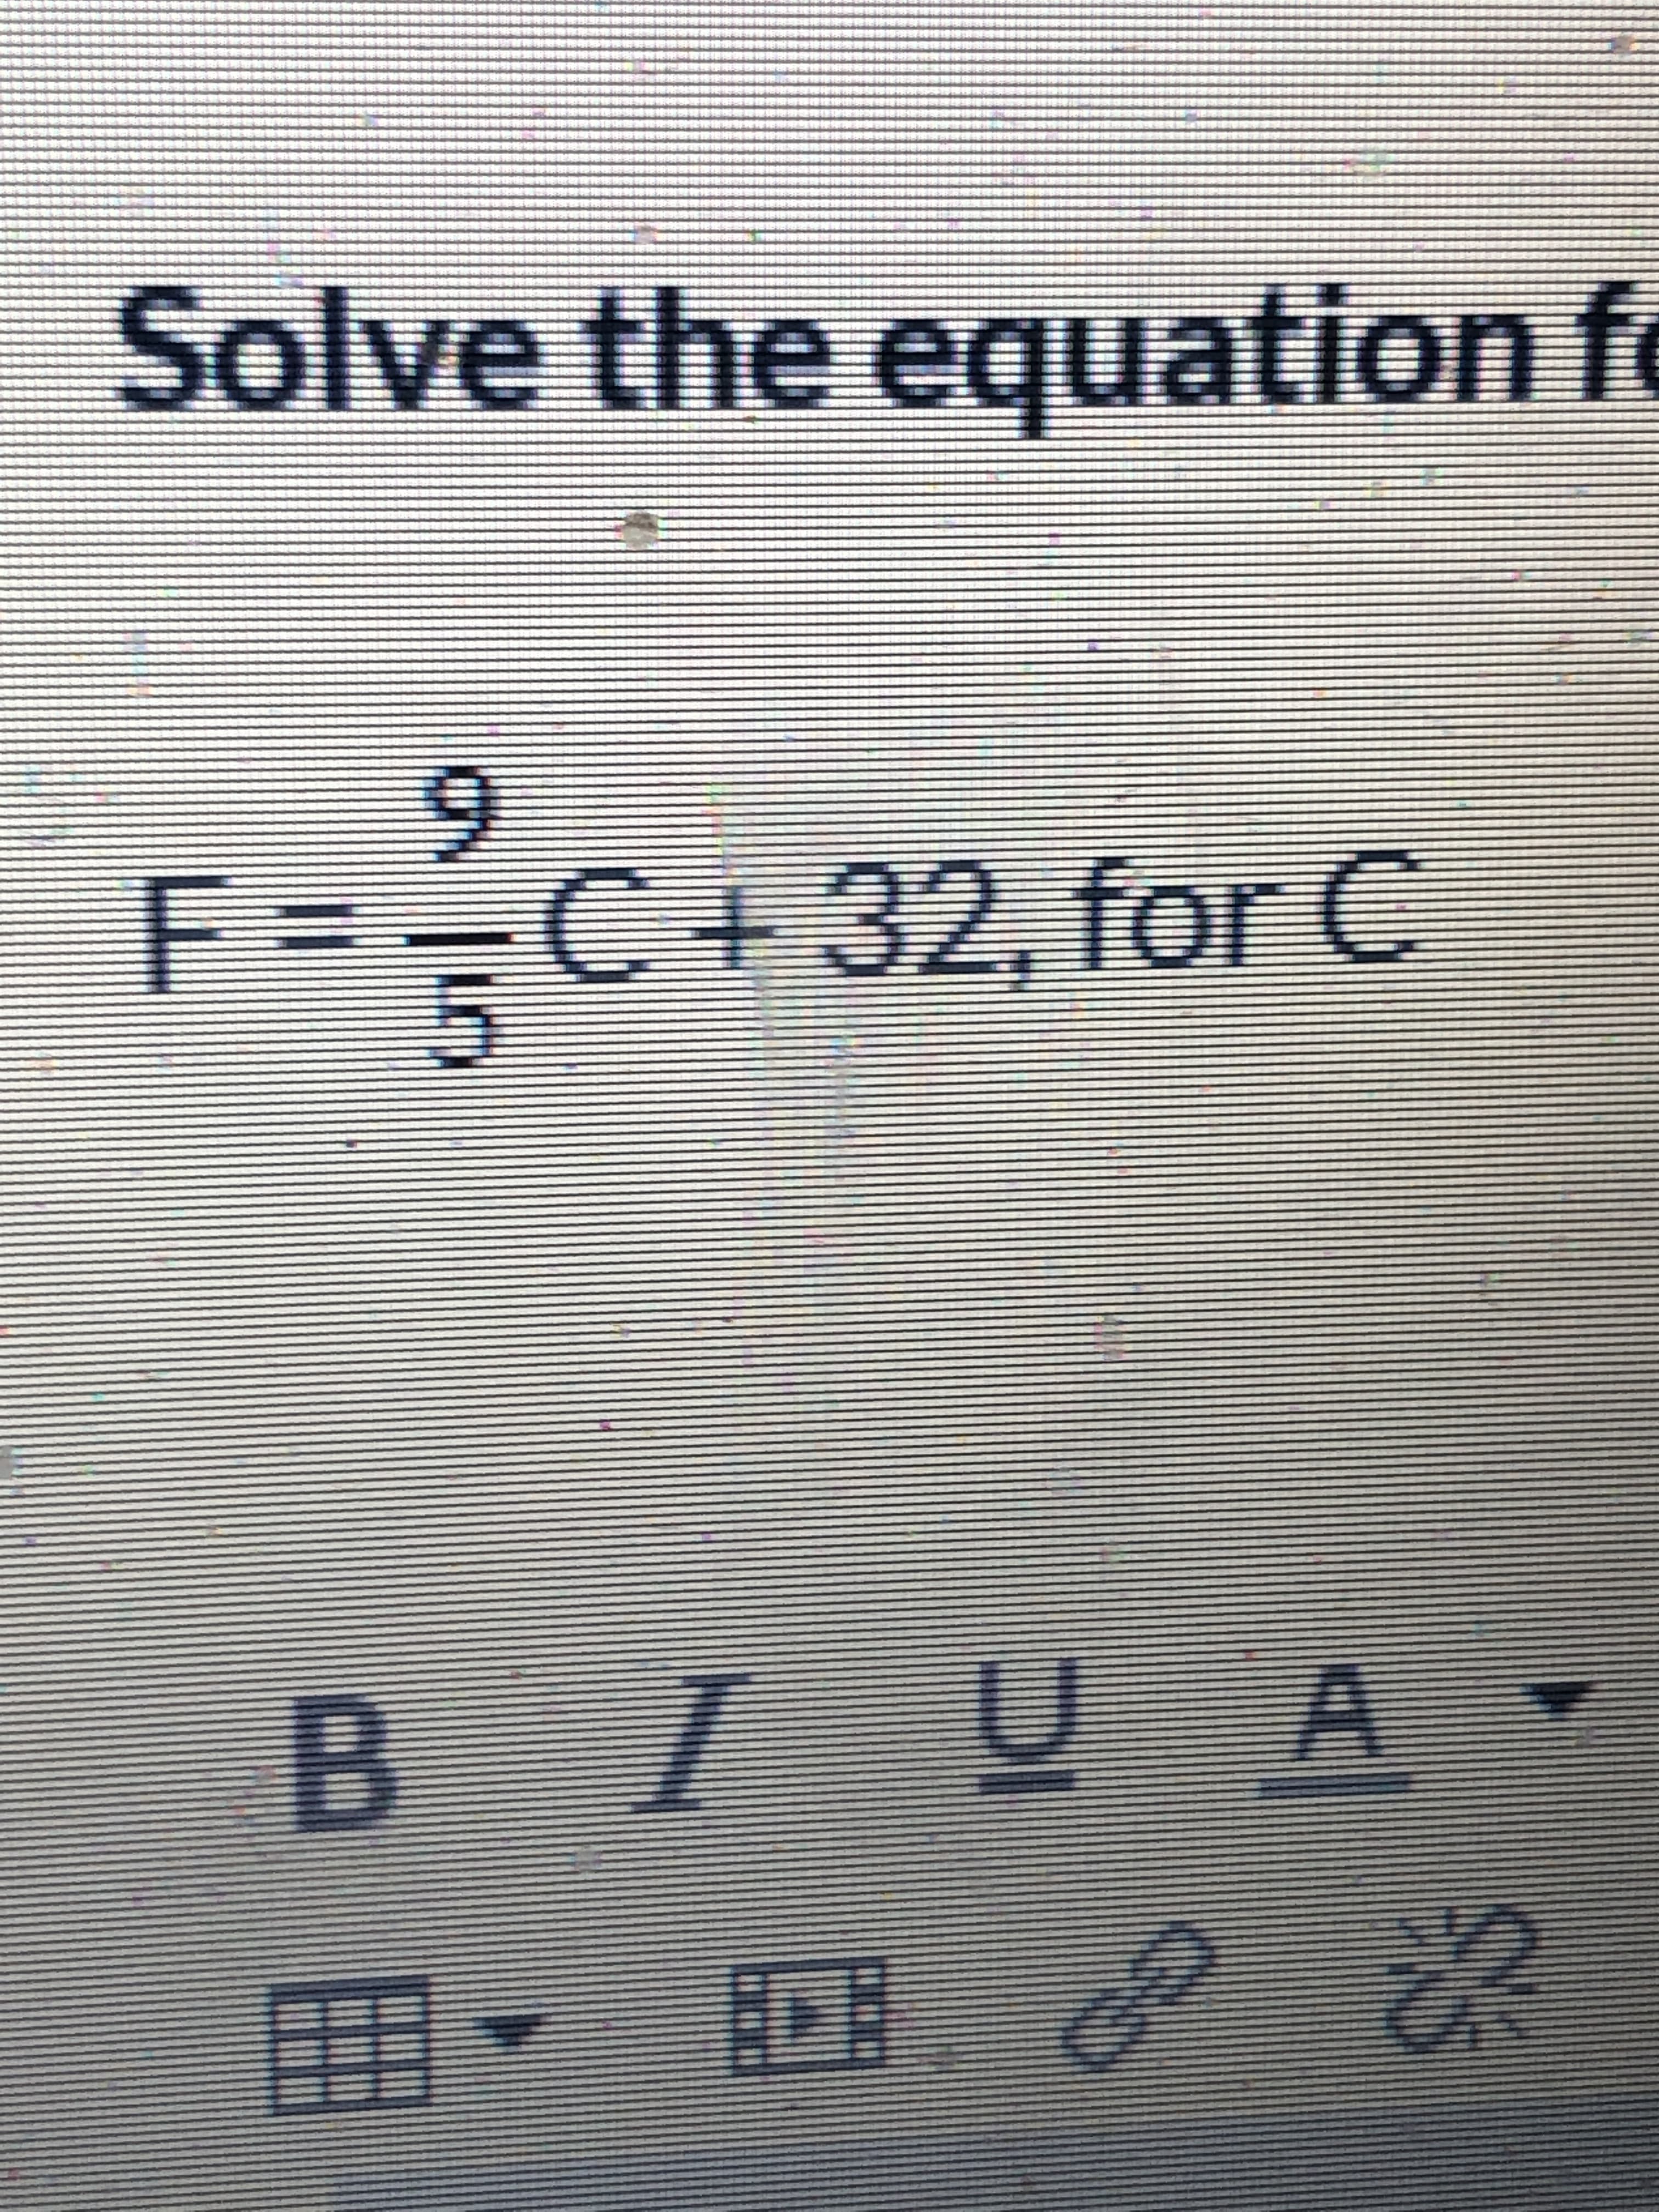 Solve the equation fo
F=-C+32. for C
B IU A
